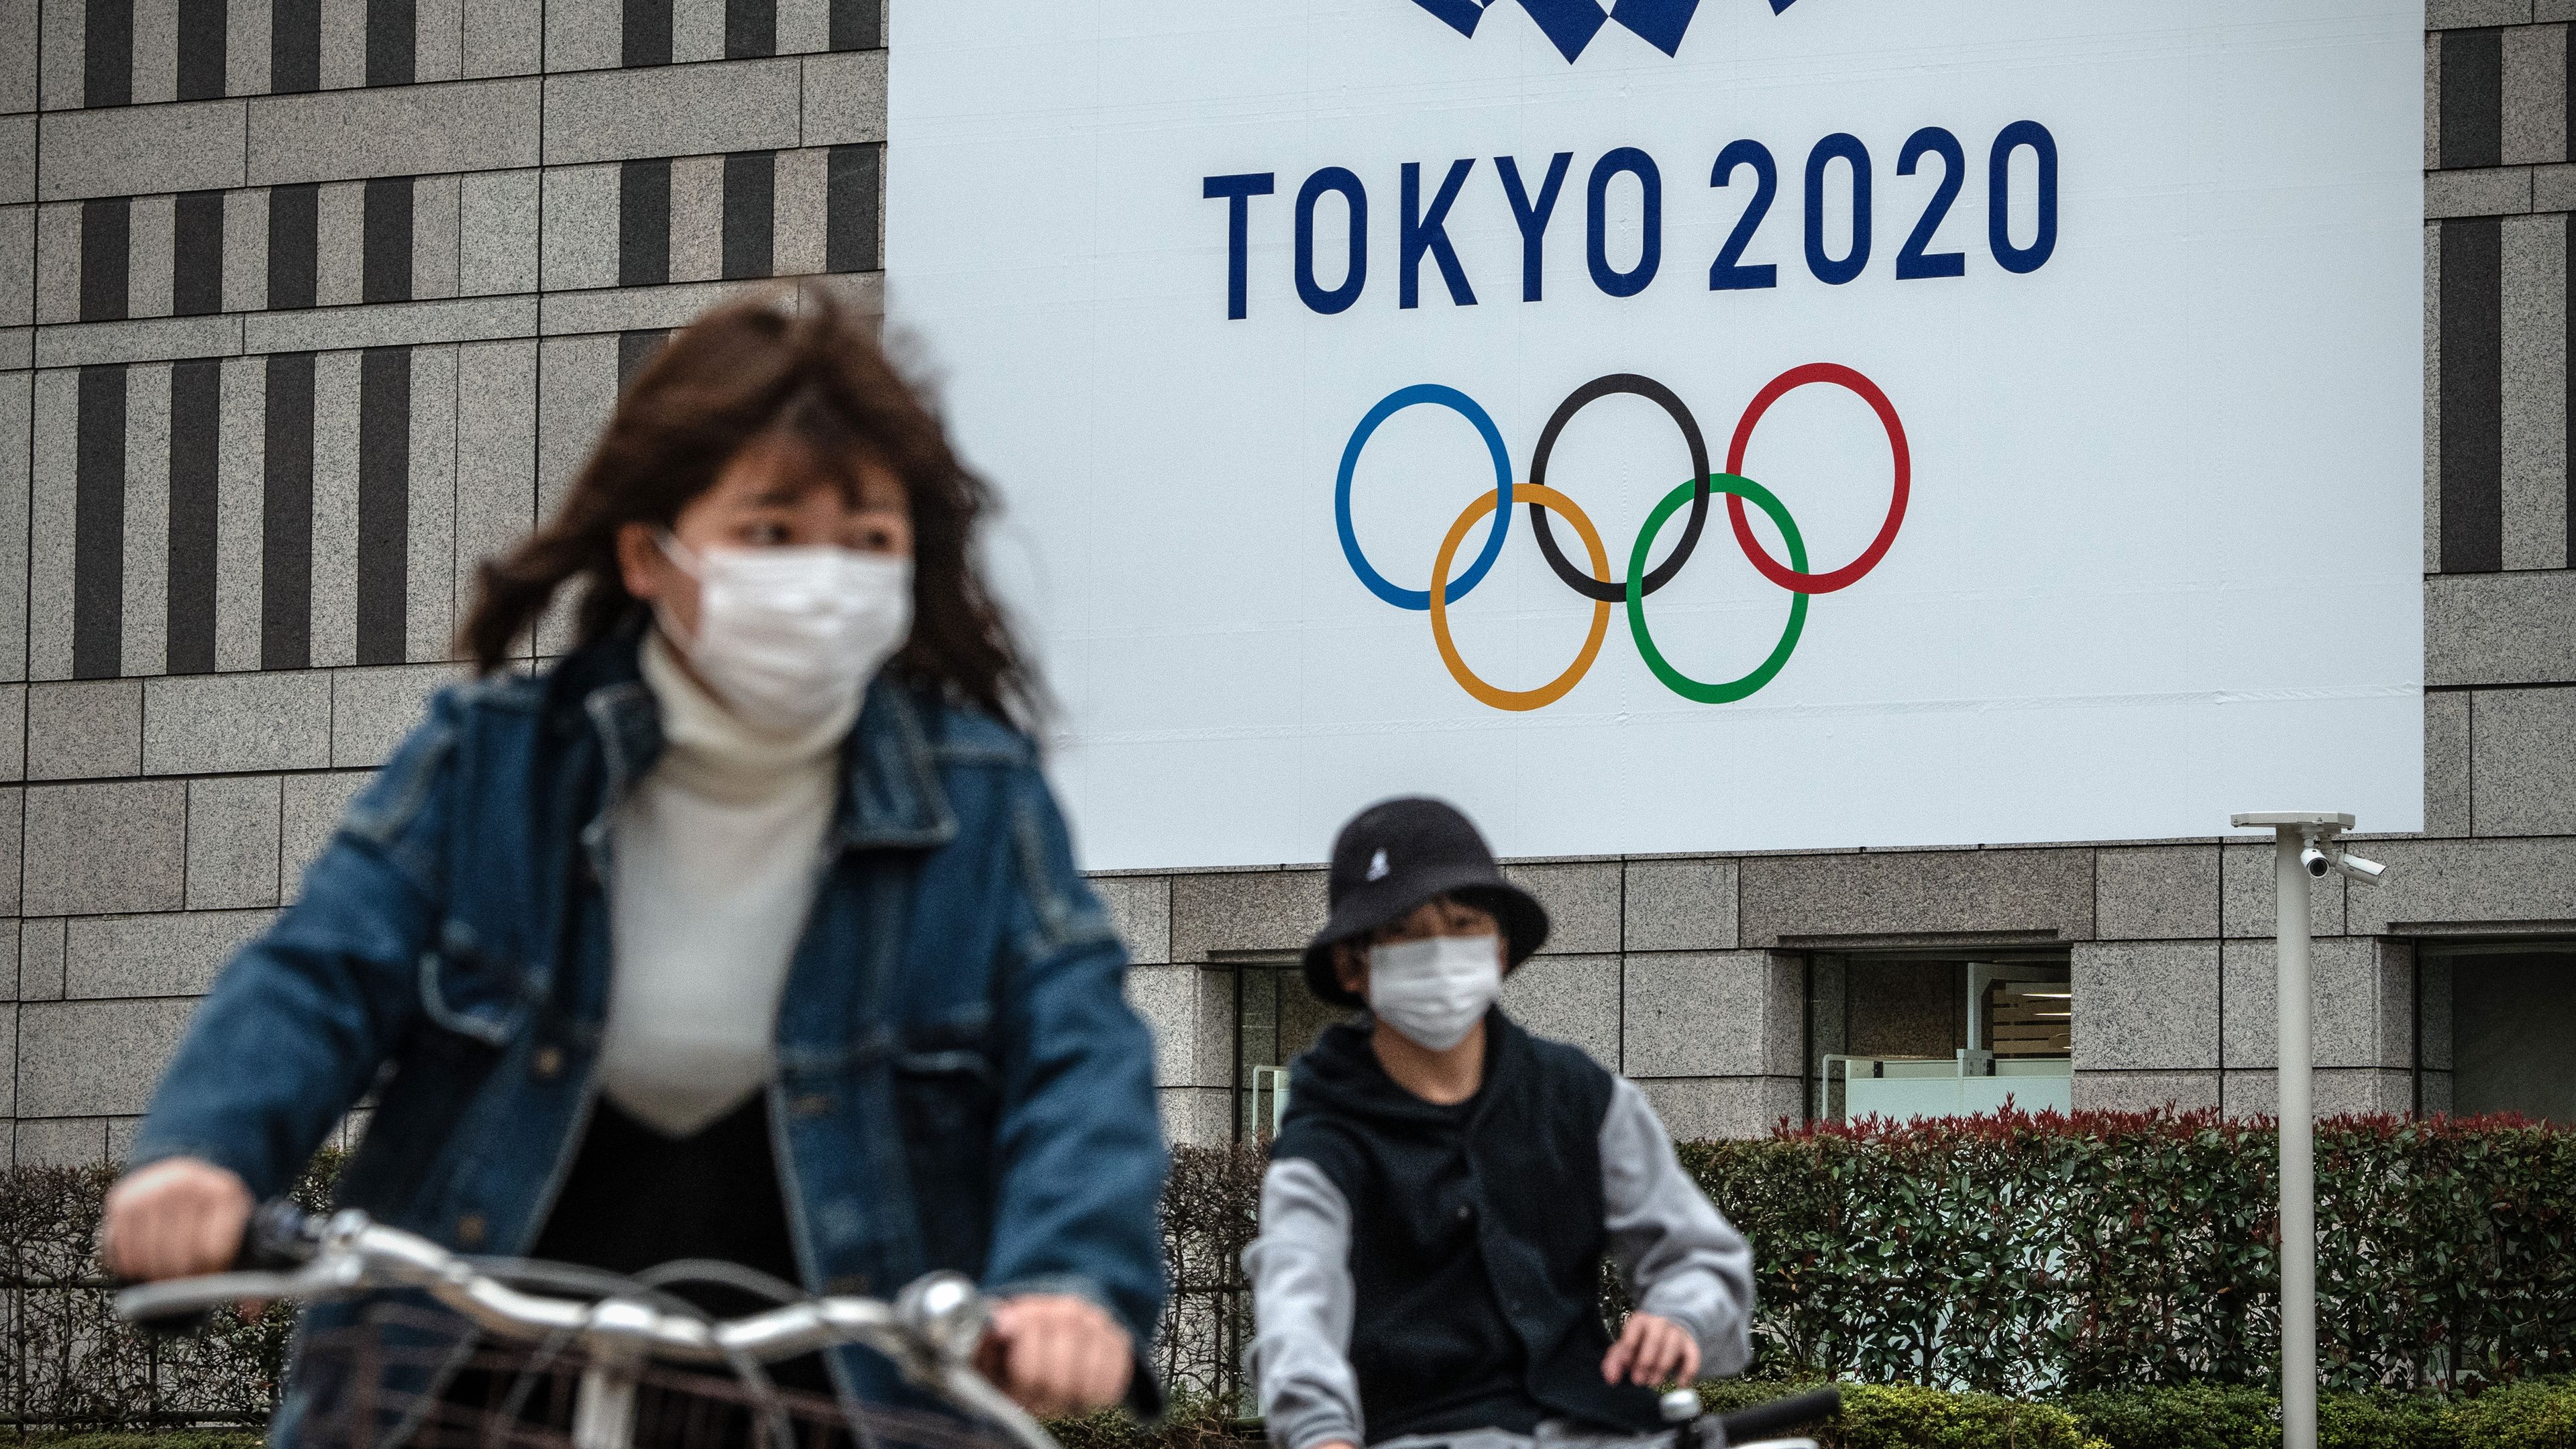 Tokyo Olympics: Confusion reigns for ticket buyers amid COVID-19 chaos